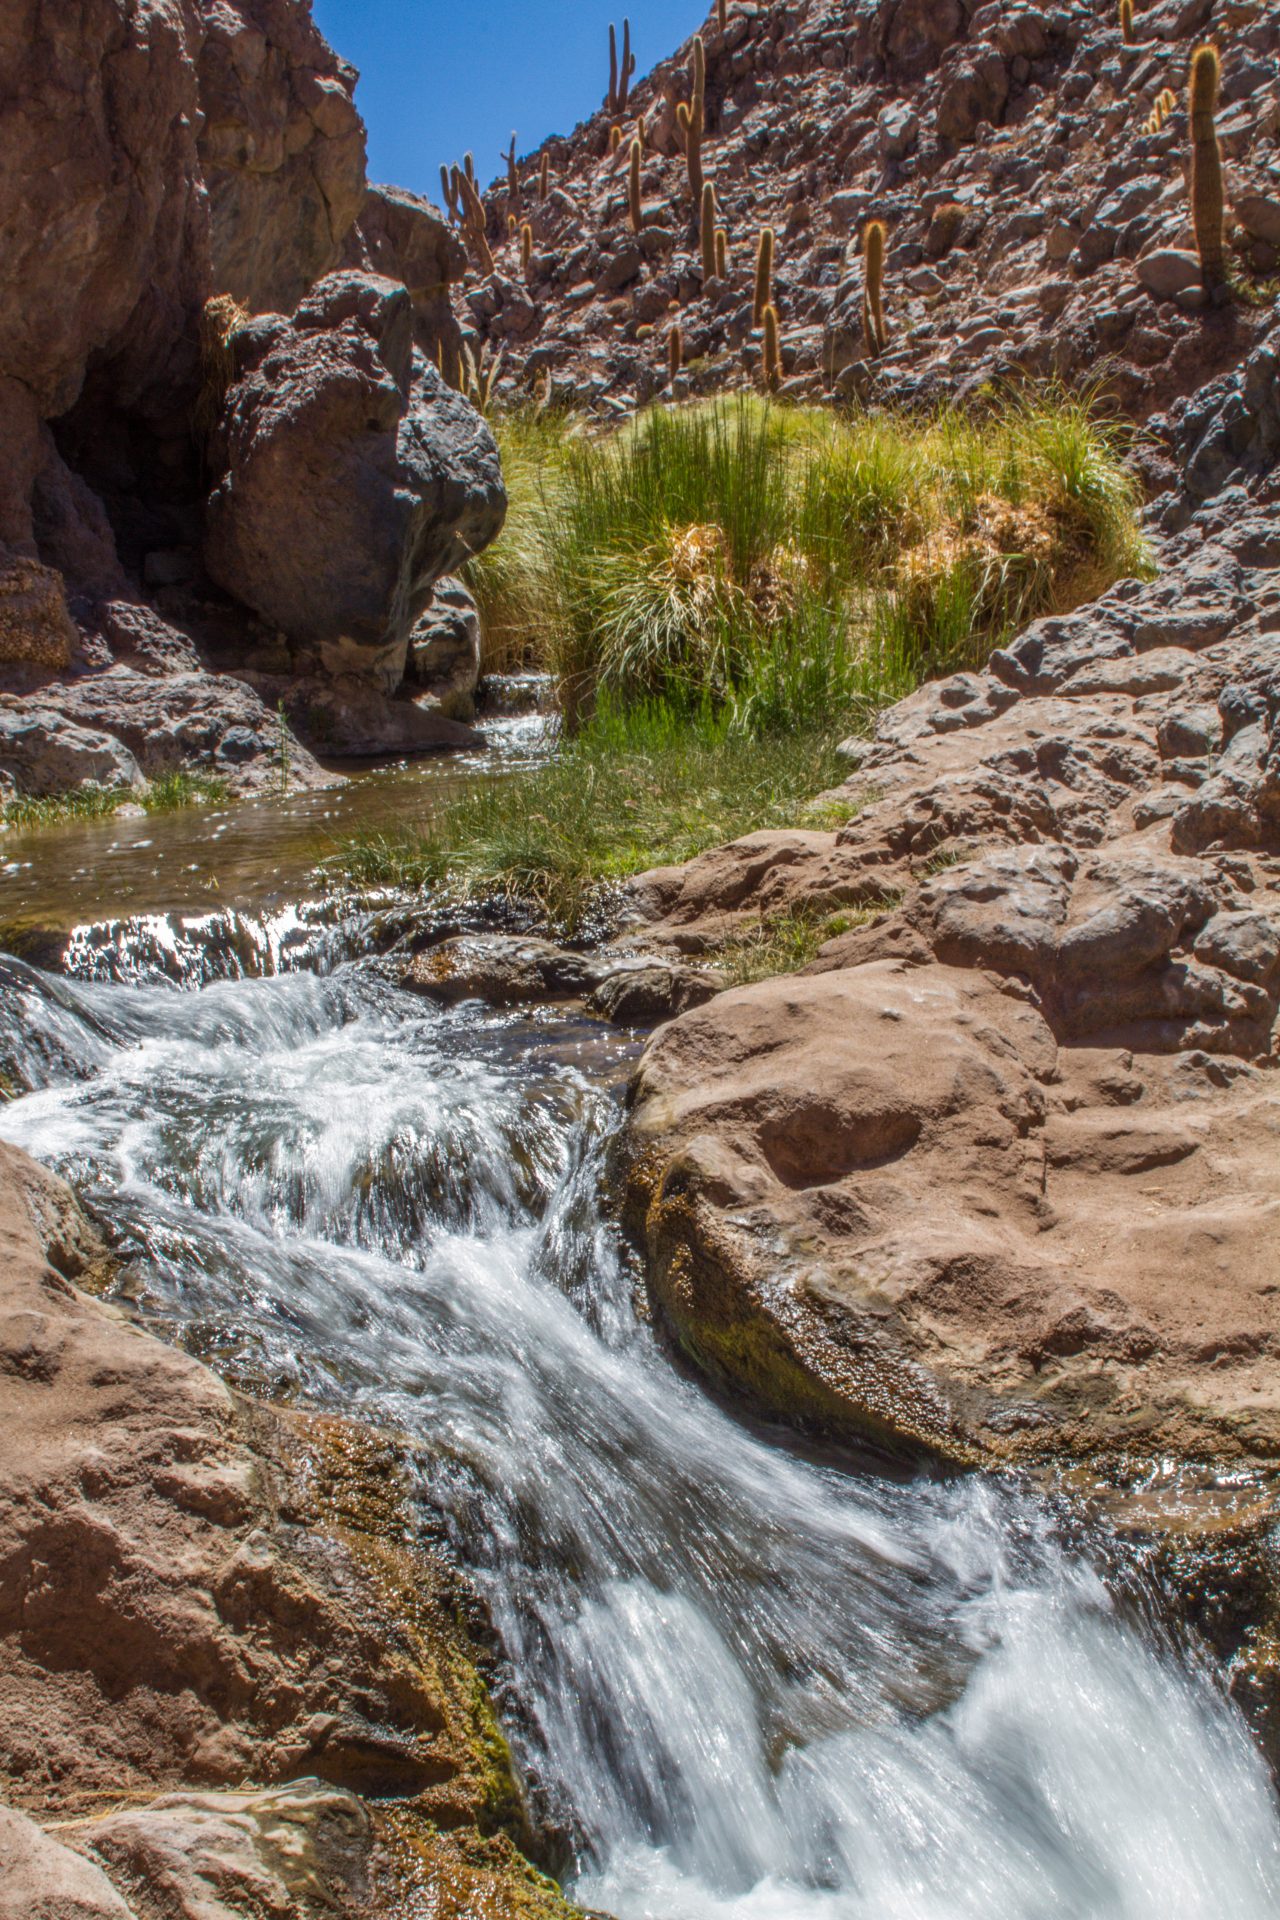 Waterfall in Cactus Valley.